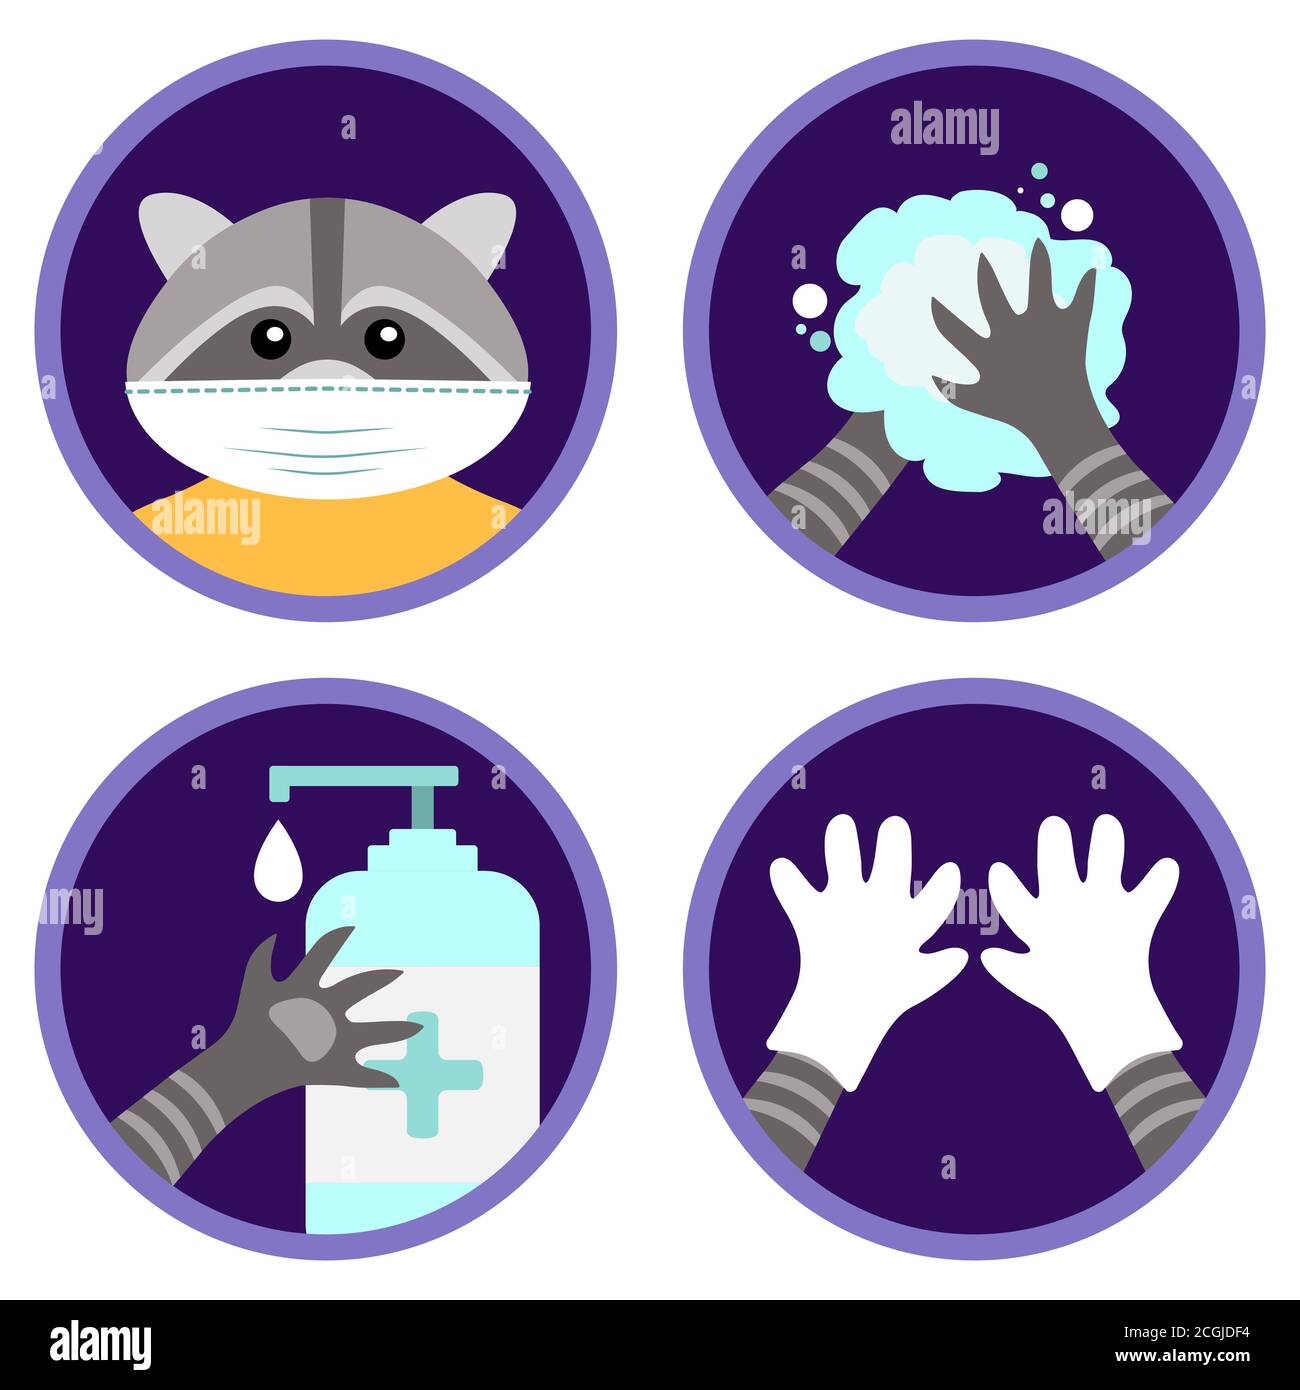 Safety measures against coronavirus illustrated by the cute raccoon. Cartoony instruction for kids. Set of flat vector icons: wear a mask, gloves etc. Stock Vector